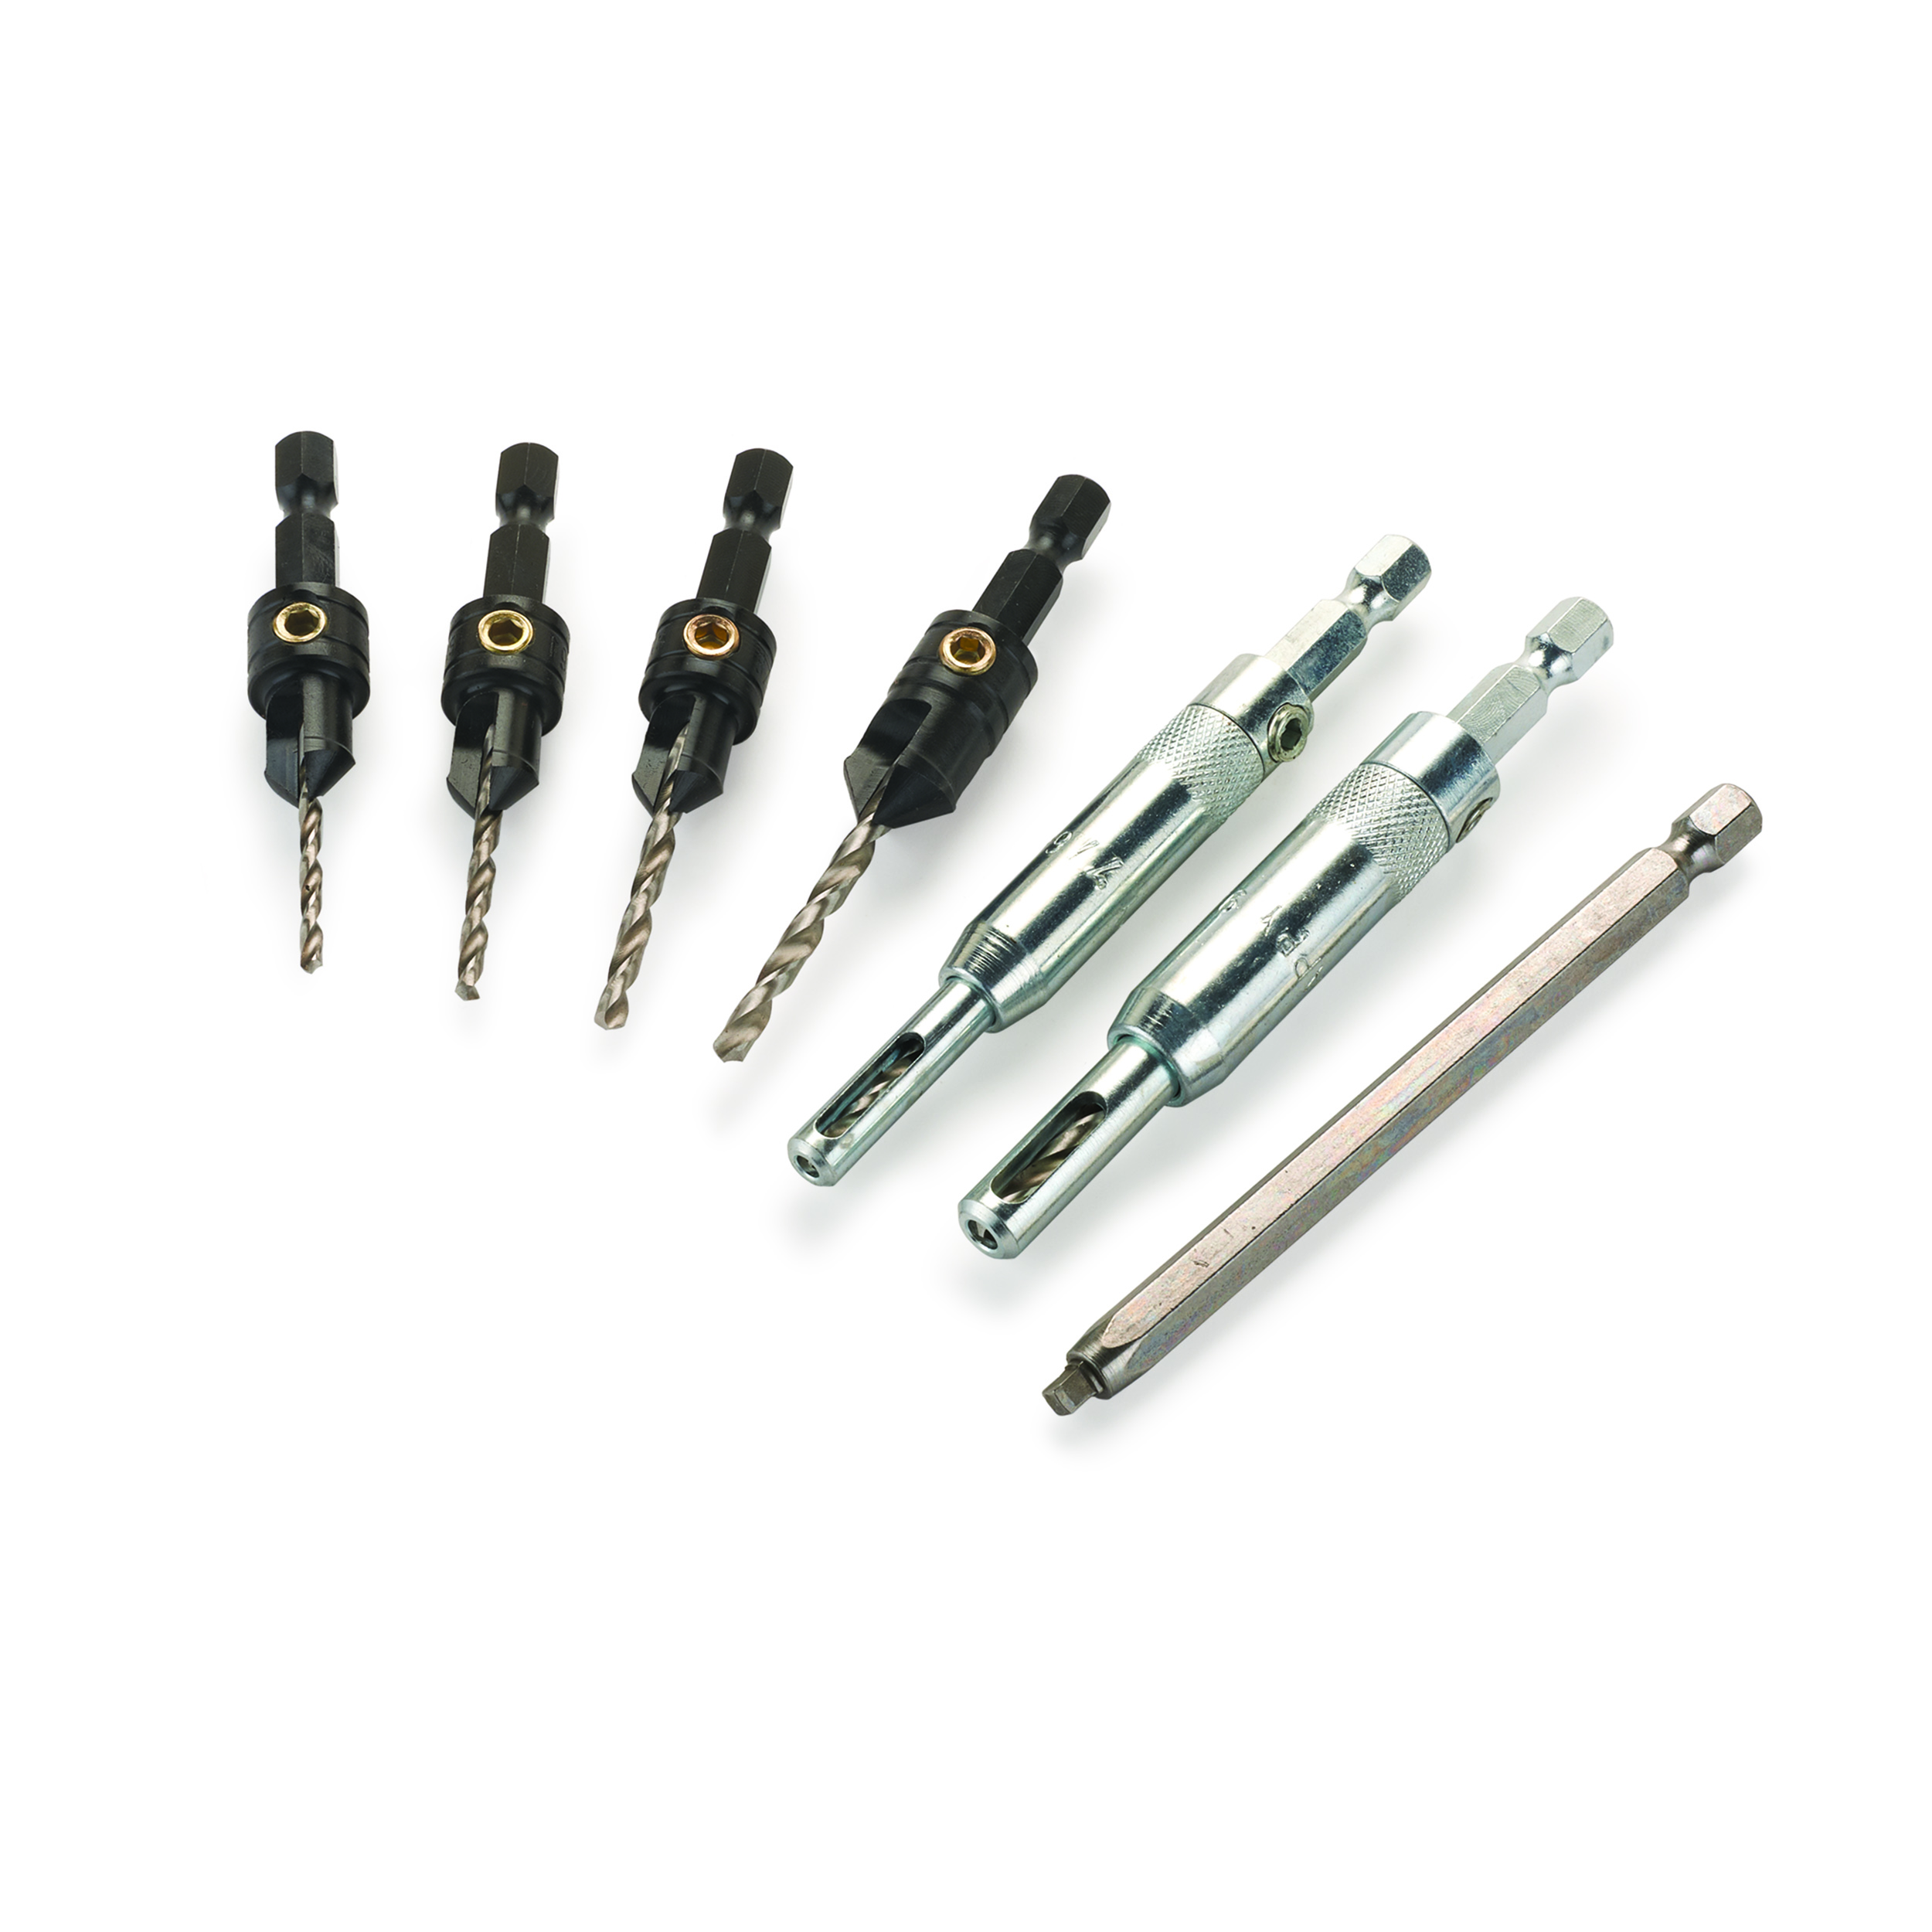 7-piece Cabinetmakers Set Fits 1/4-inch Hex Chucks